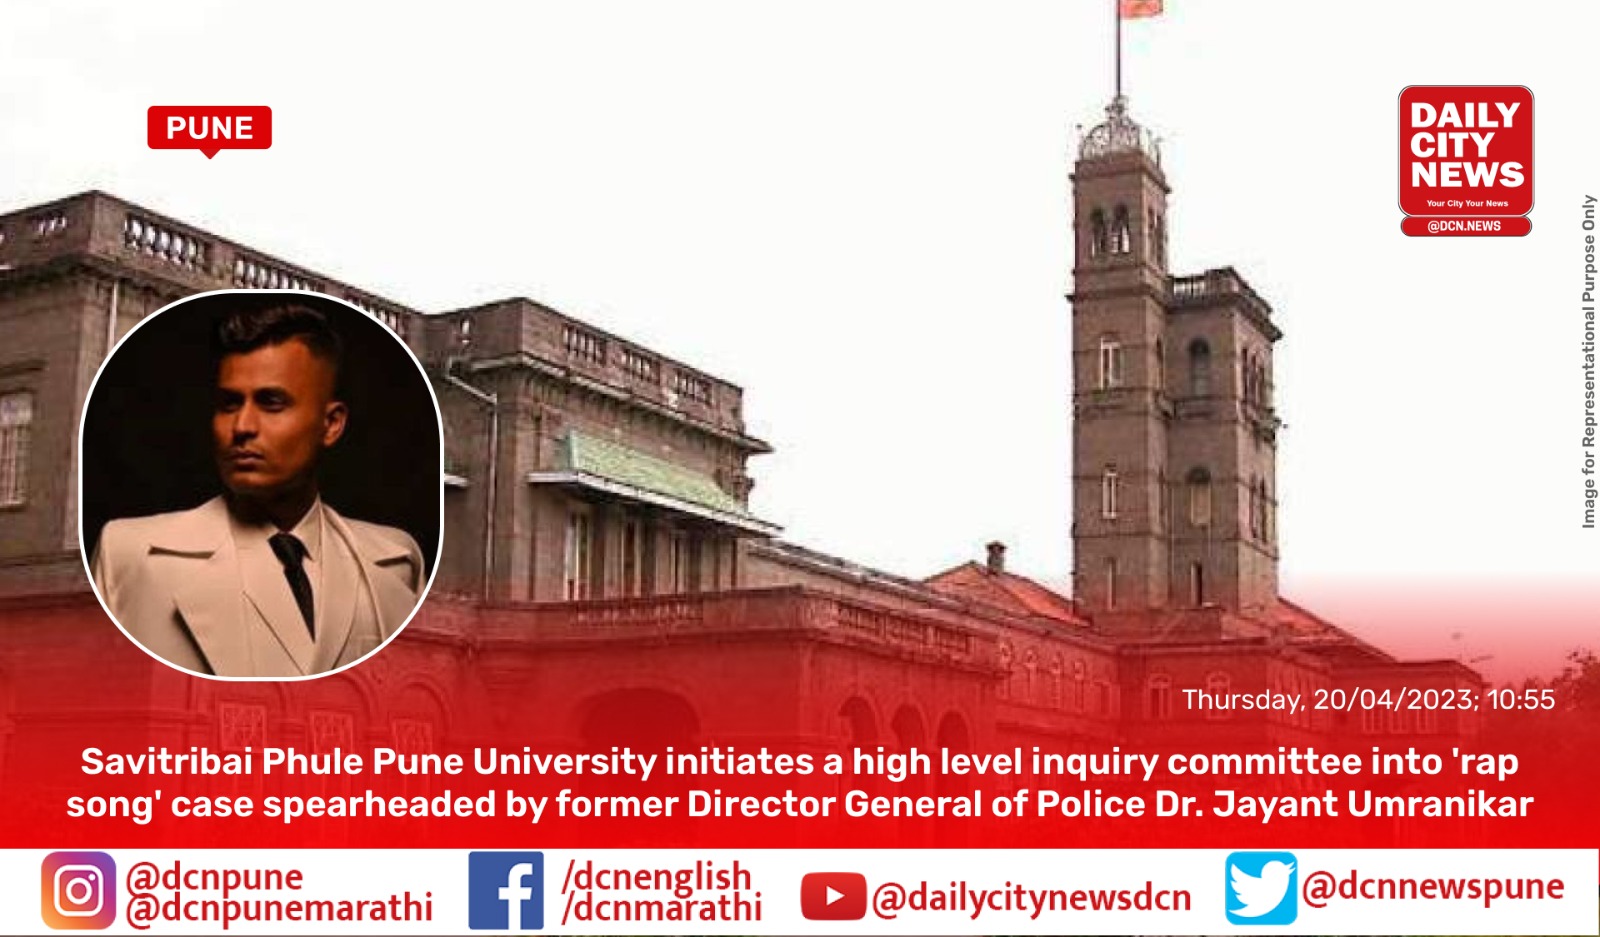 Savitribai Phule Pune University initiates a high level inquiry committee into 'rap song' case spearheaded by former Director General of Police Dr. Jayant Umranikar